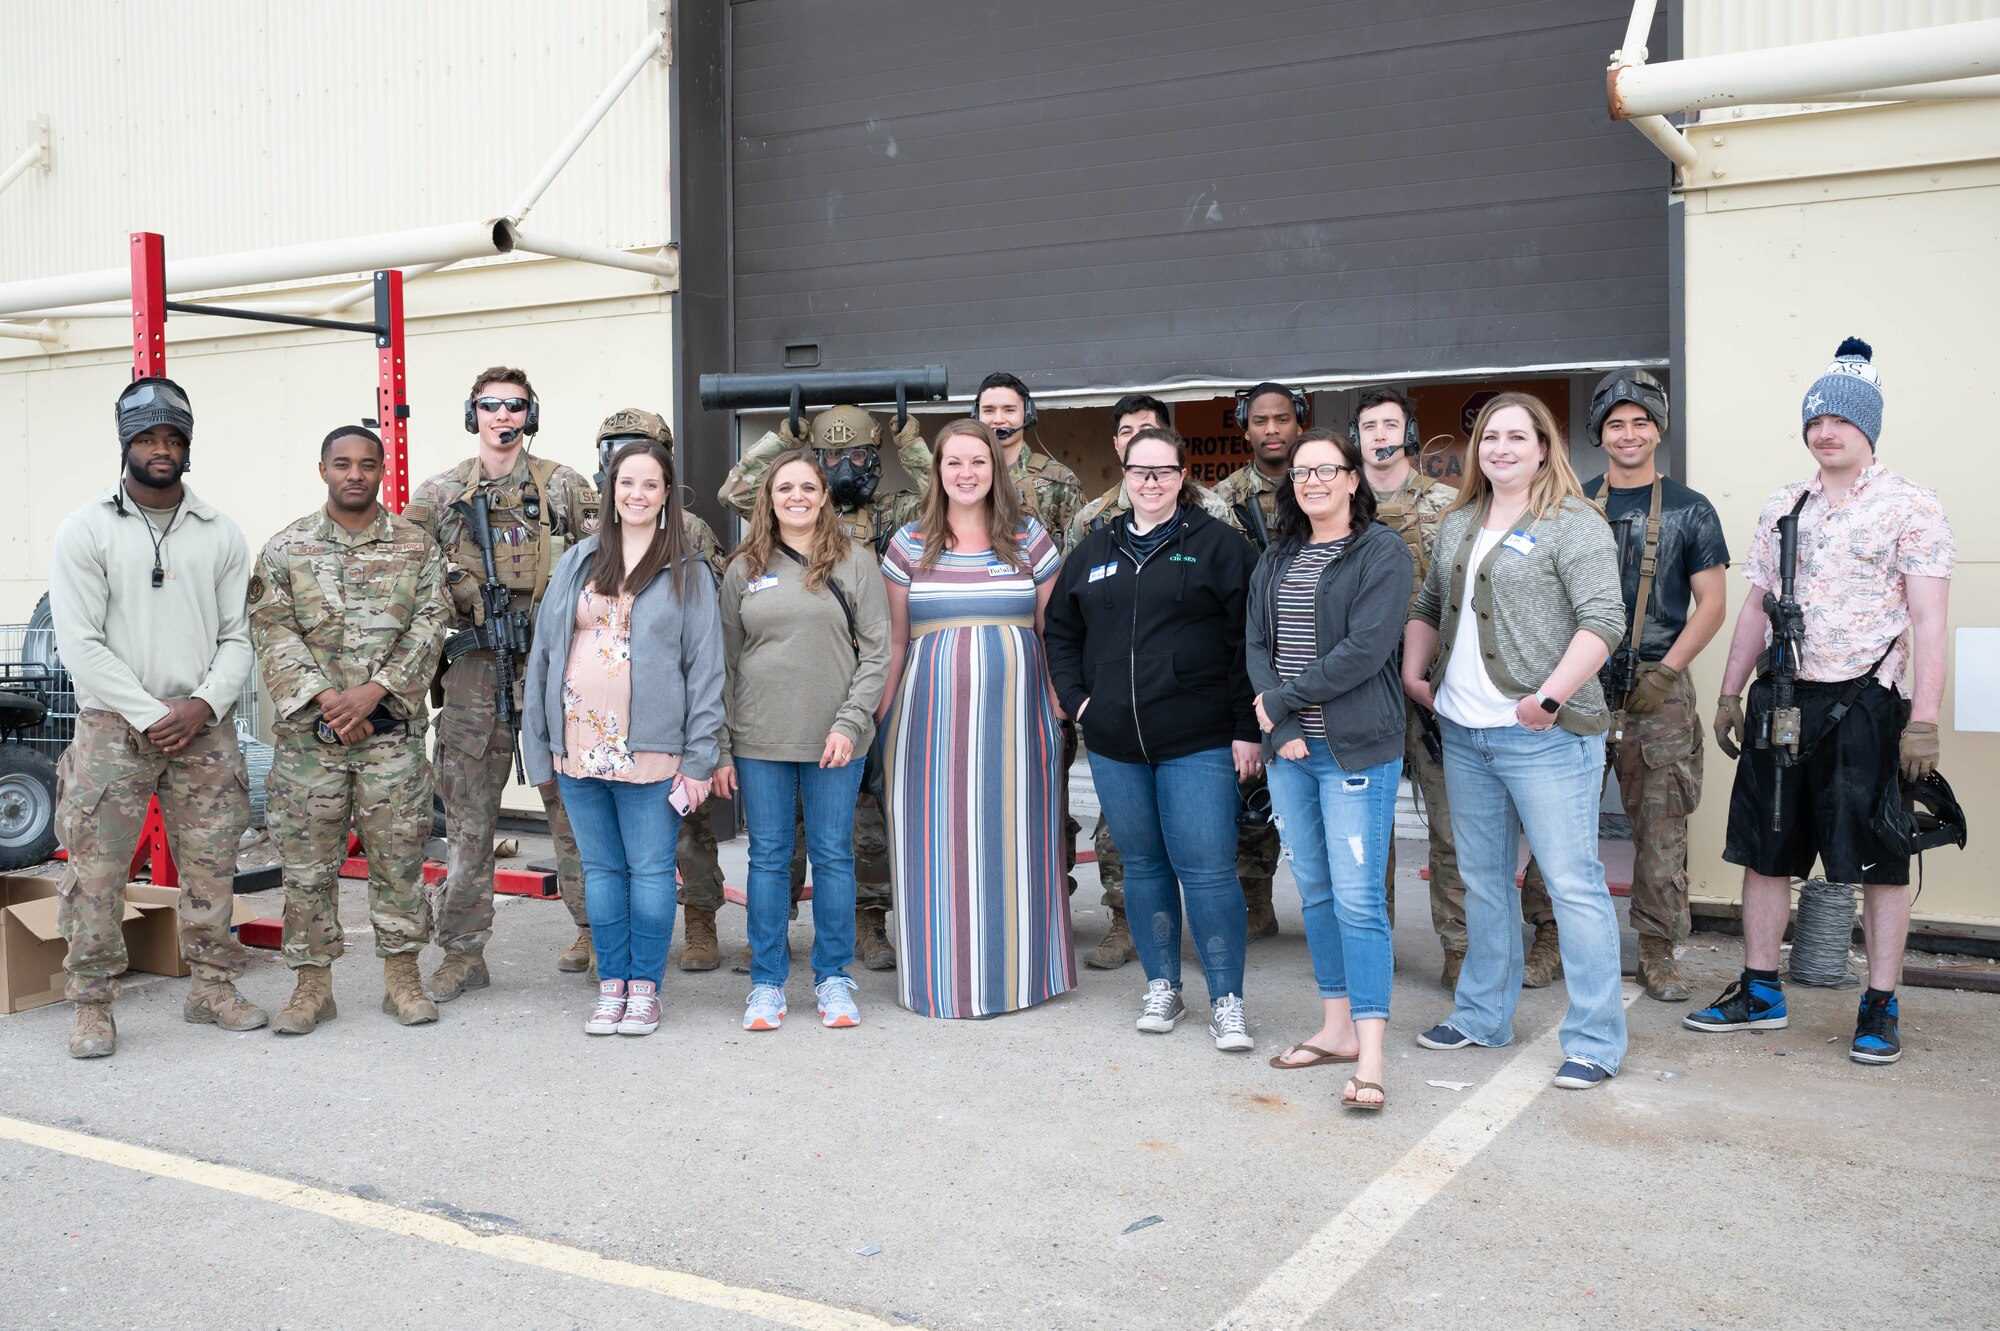 Airmen from the 341st Missile Security Operations Squadron tactical response force and military spouses pose for a photo during a tour May 7, 2021, at Malmstrom Air Force Base, Mont.